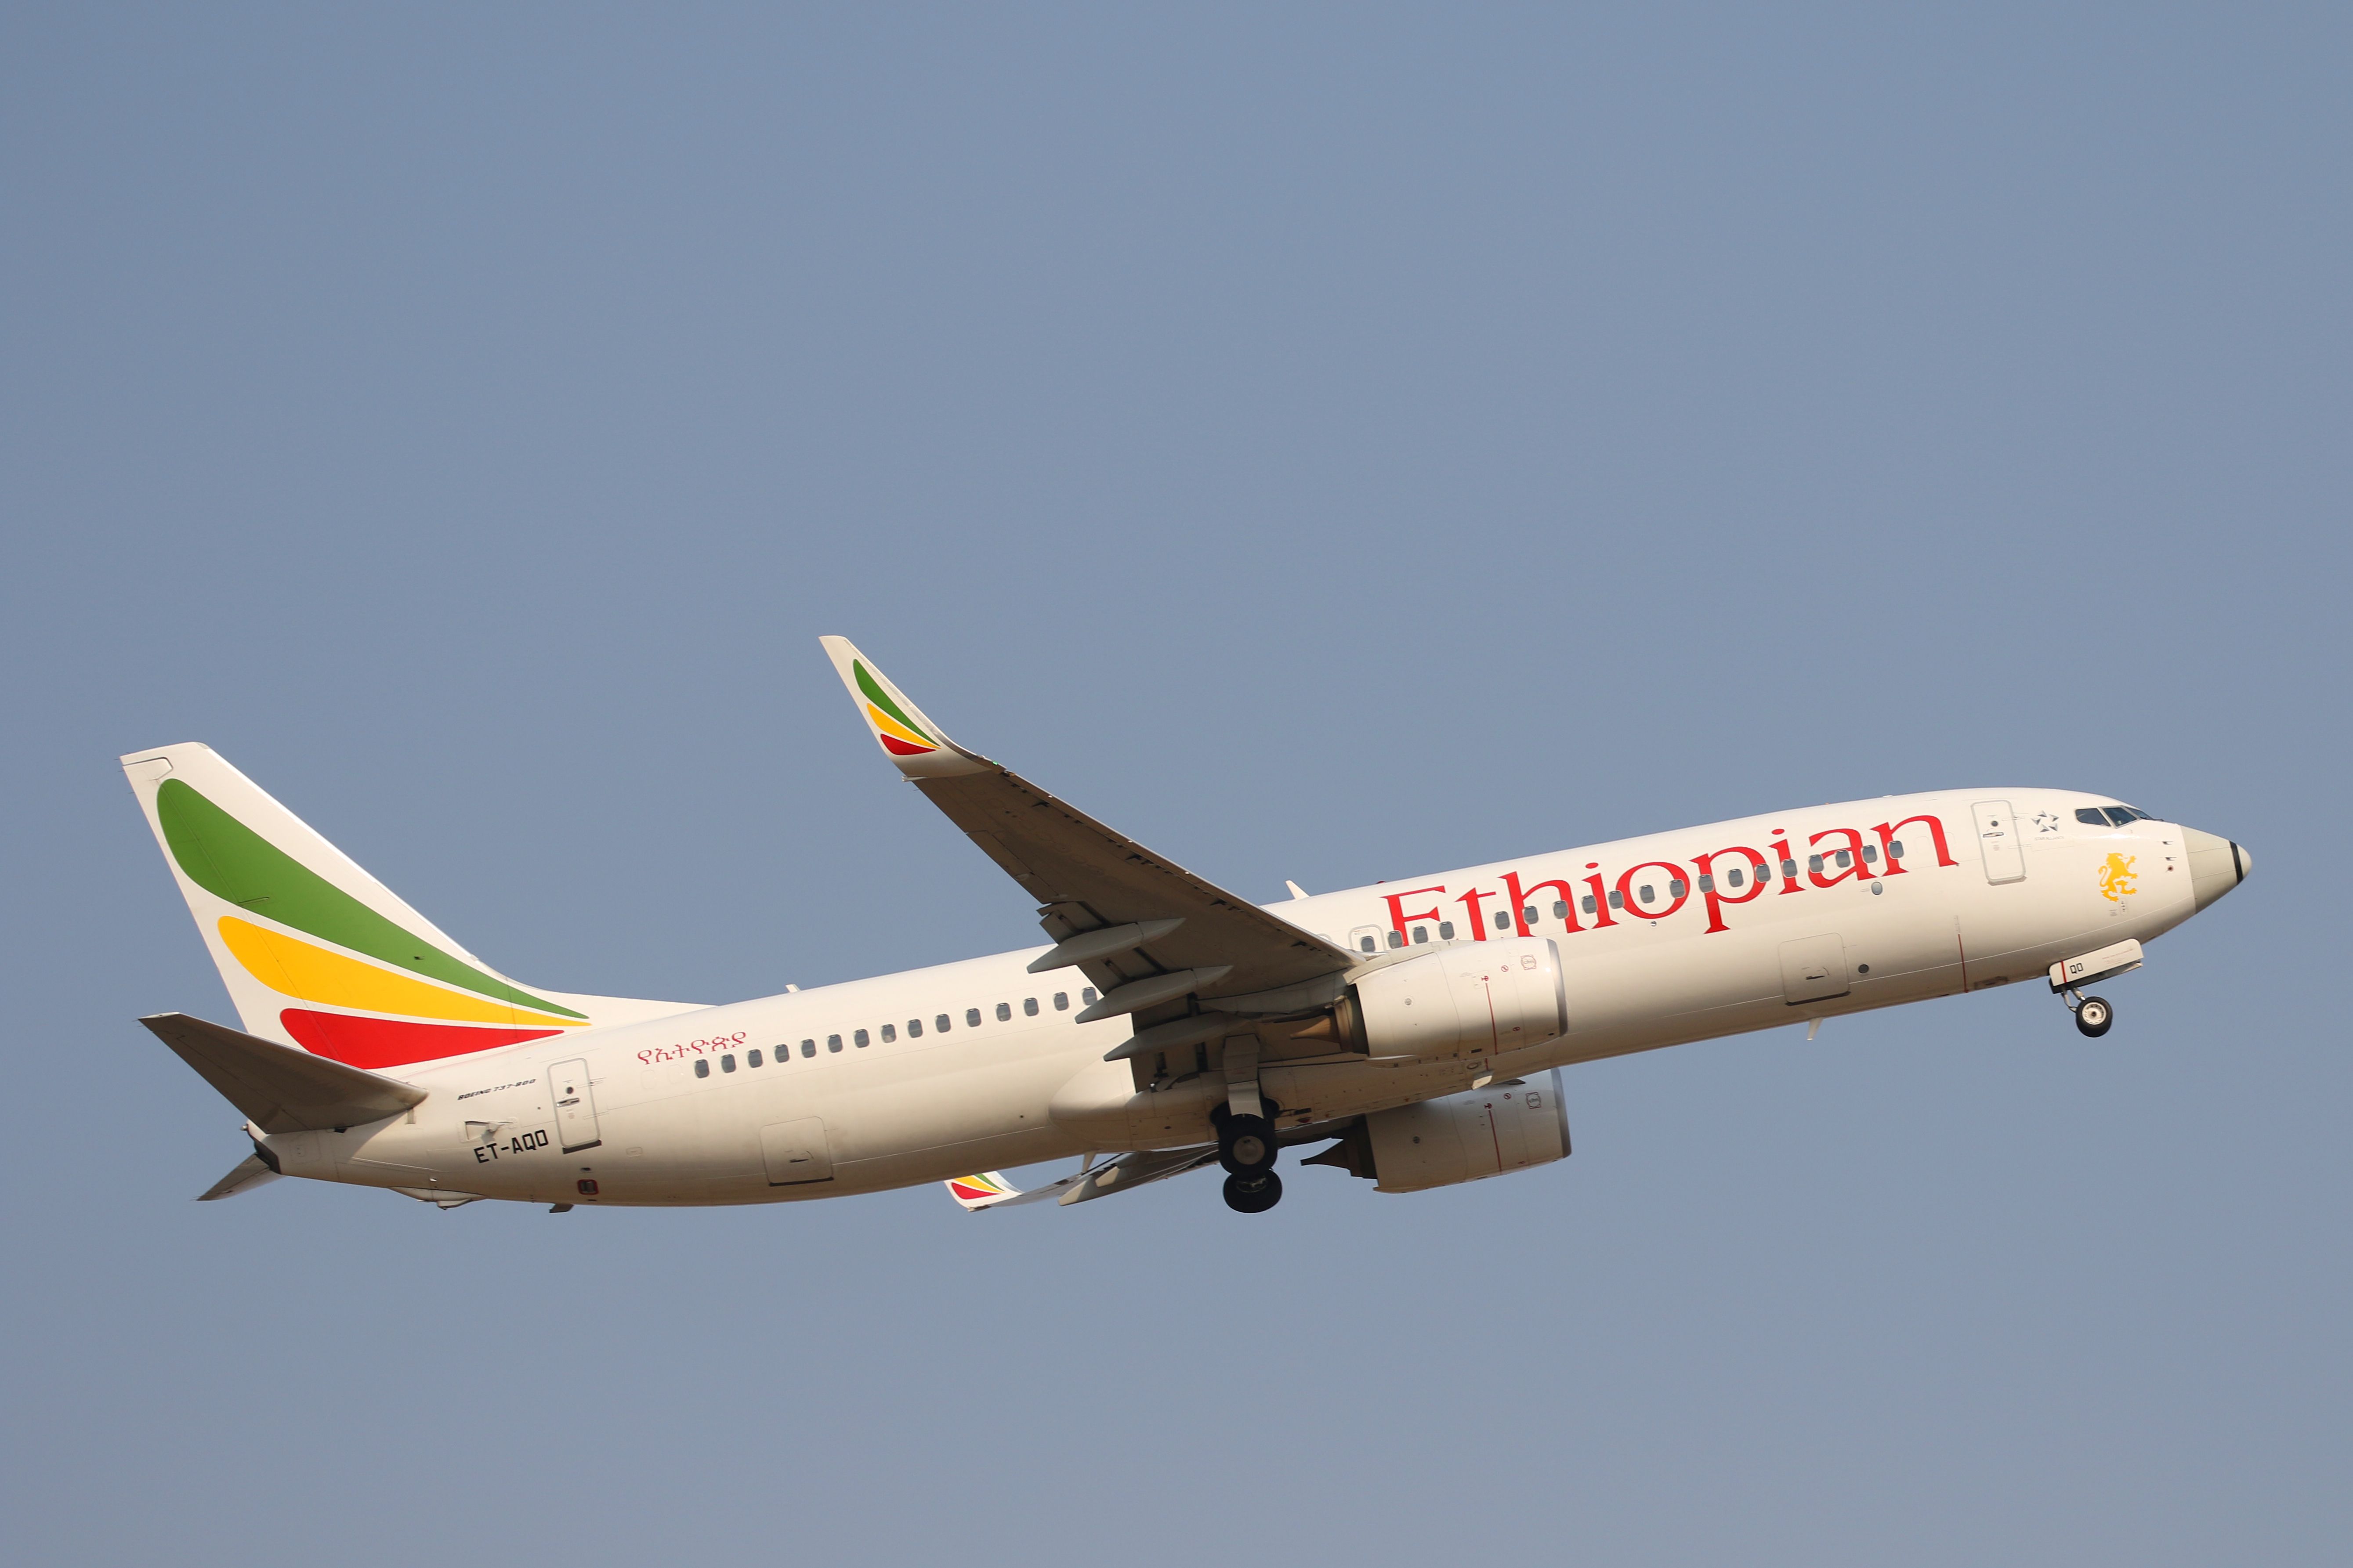 Ethiopian Airlines Boeing 737-800 taking off from JNB